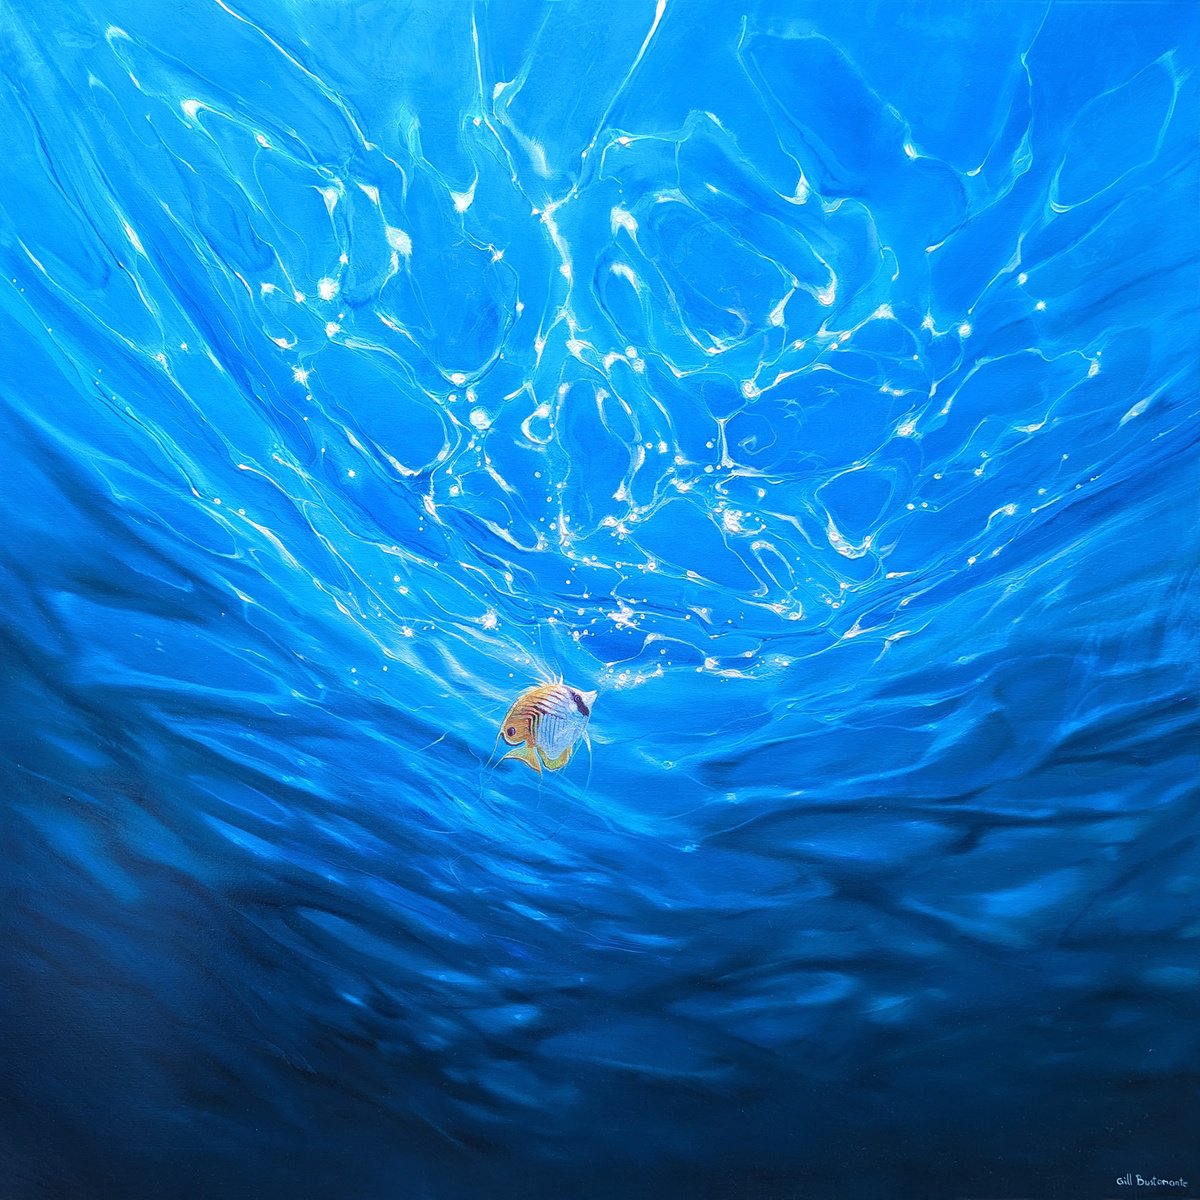 Looking Beyond the Blue, underwater seascape with fish by Gill Bustamante